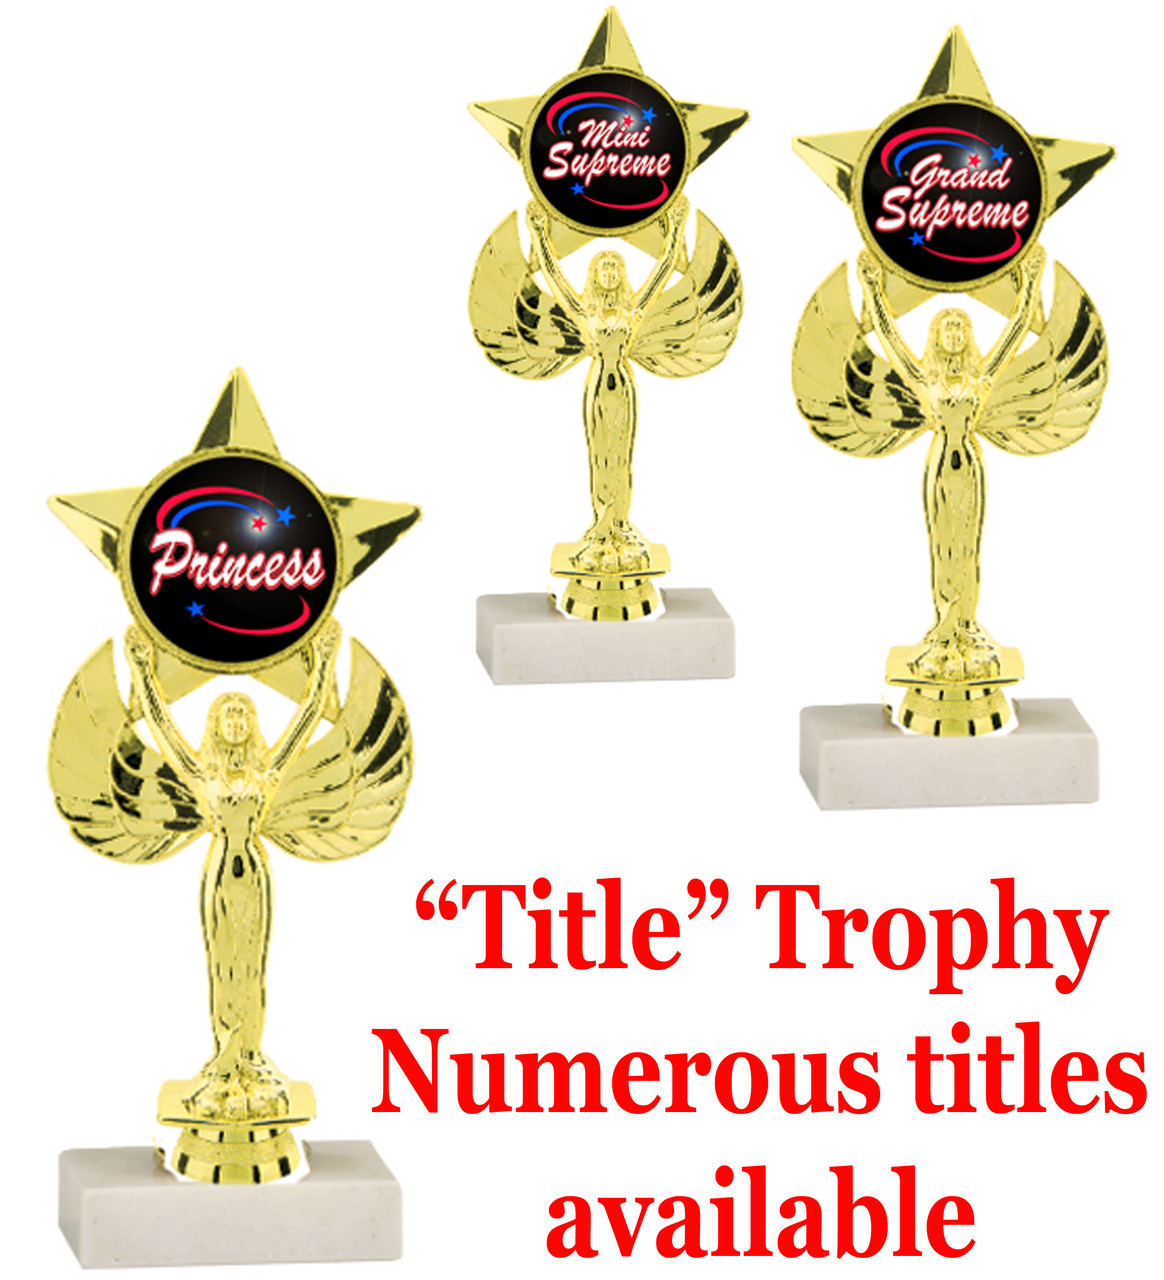 Soccer Trophies 26-36” Perpetual Futbol Cup Trophy Award For Sport &  Fantasy - Personalized Engravings - TrophySmack